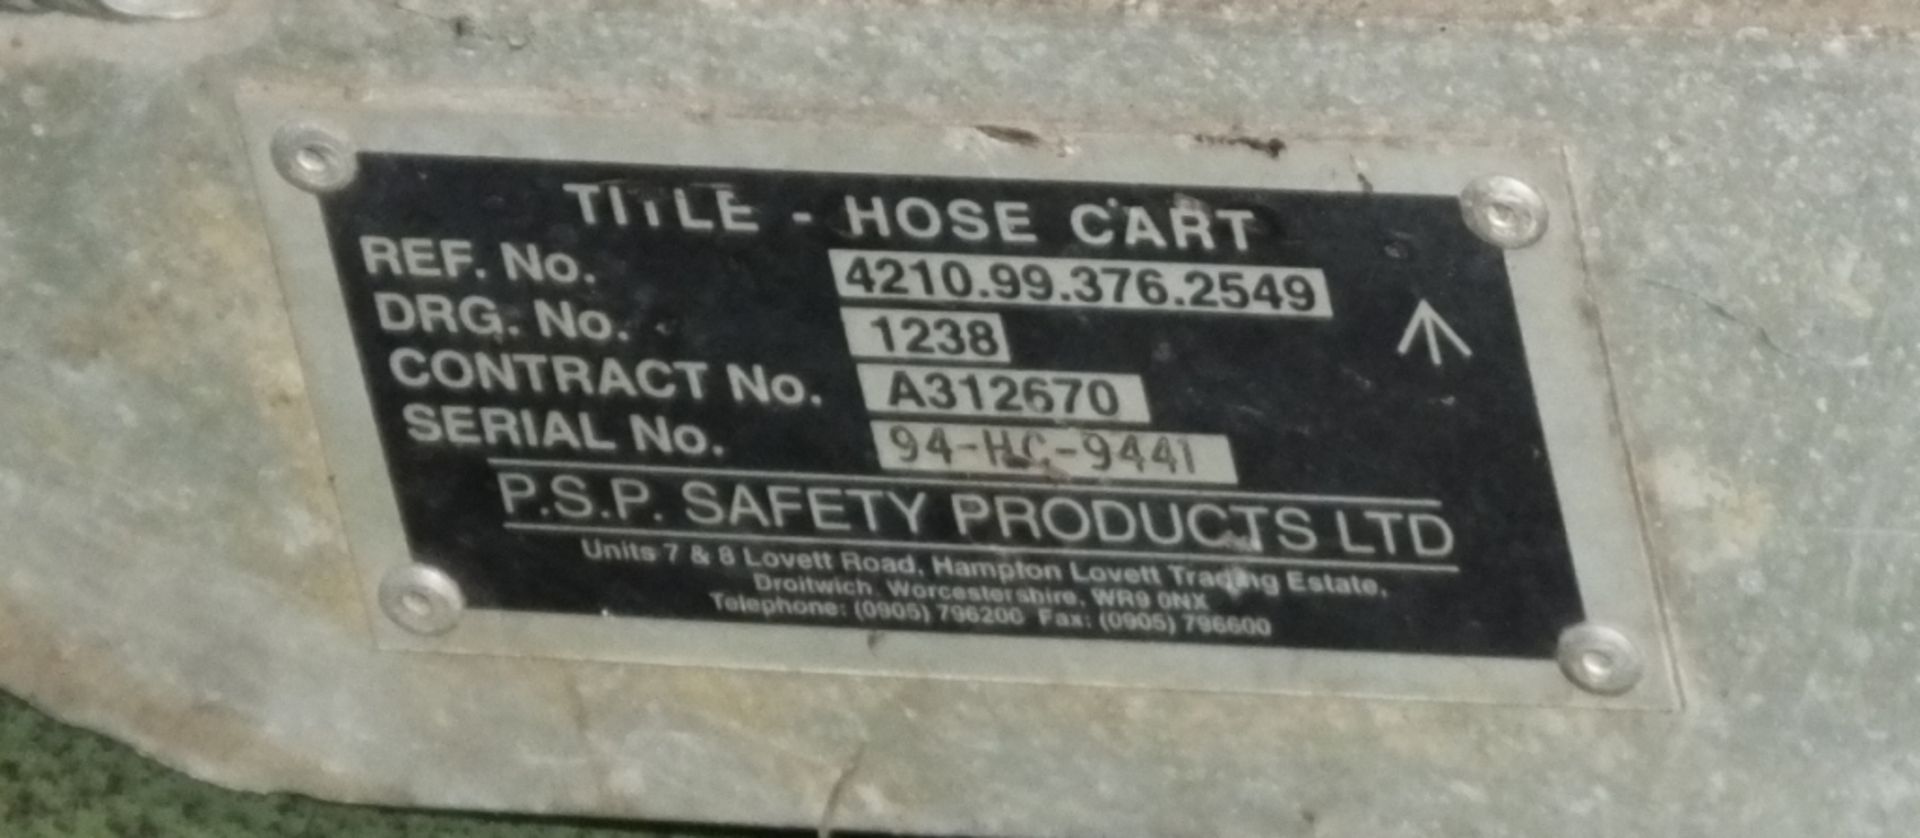 PSP Safety Products Hose cart - Image 2 of 3